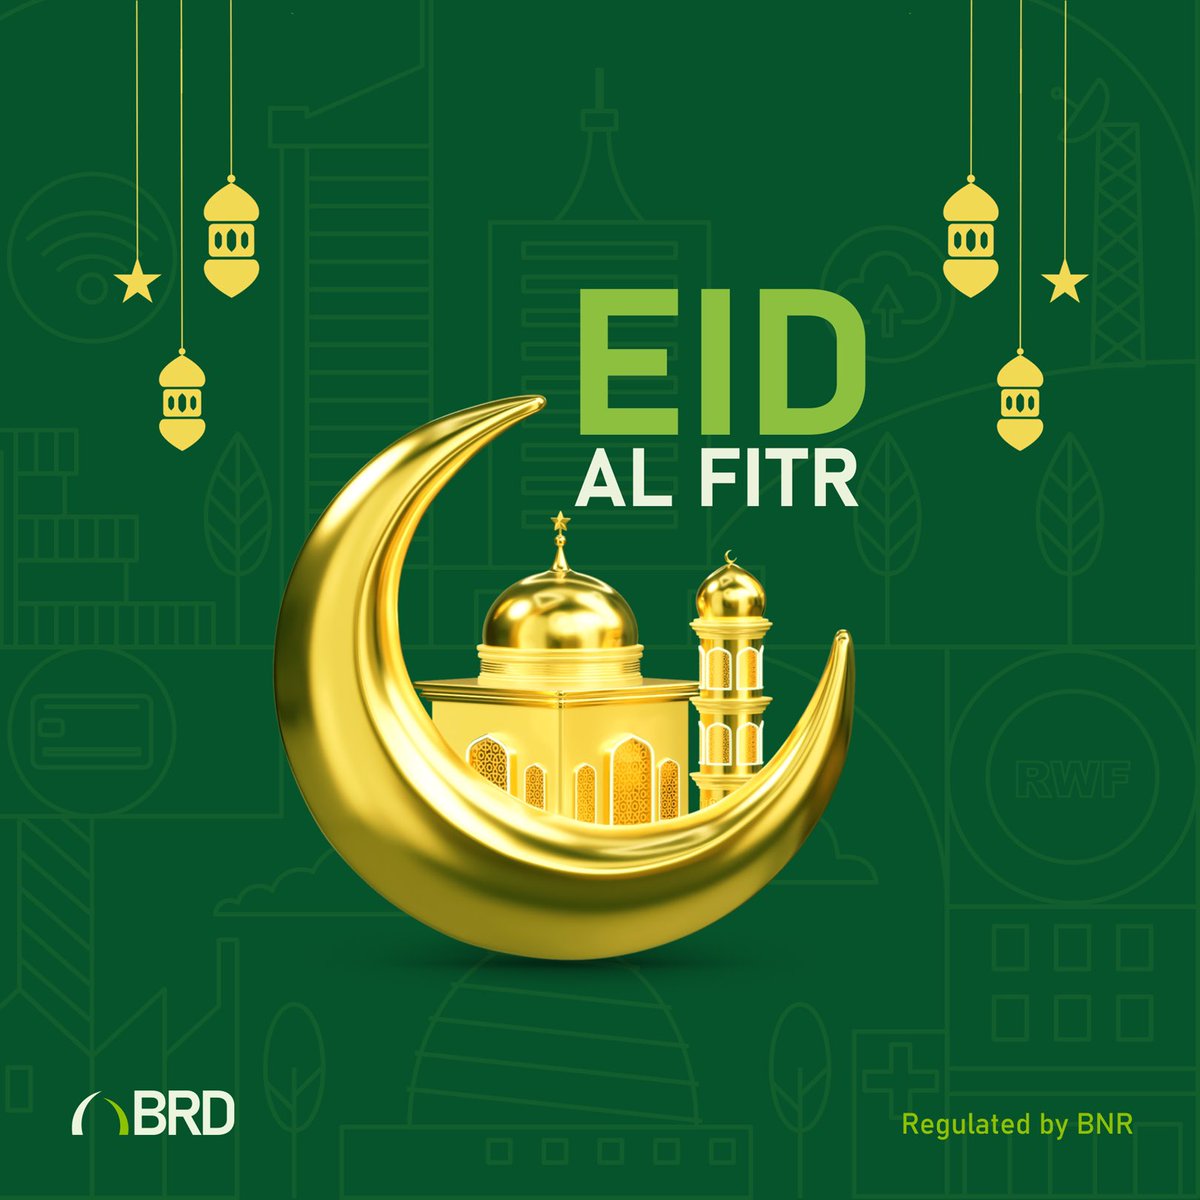 May the spirit of Eid bring unity, compassion, and peace. #EidAlFitr to you all.